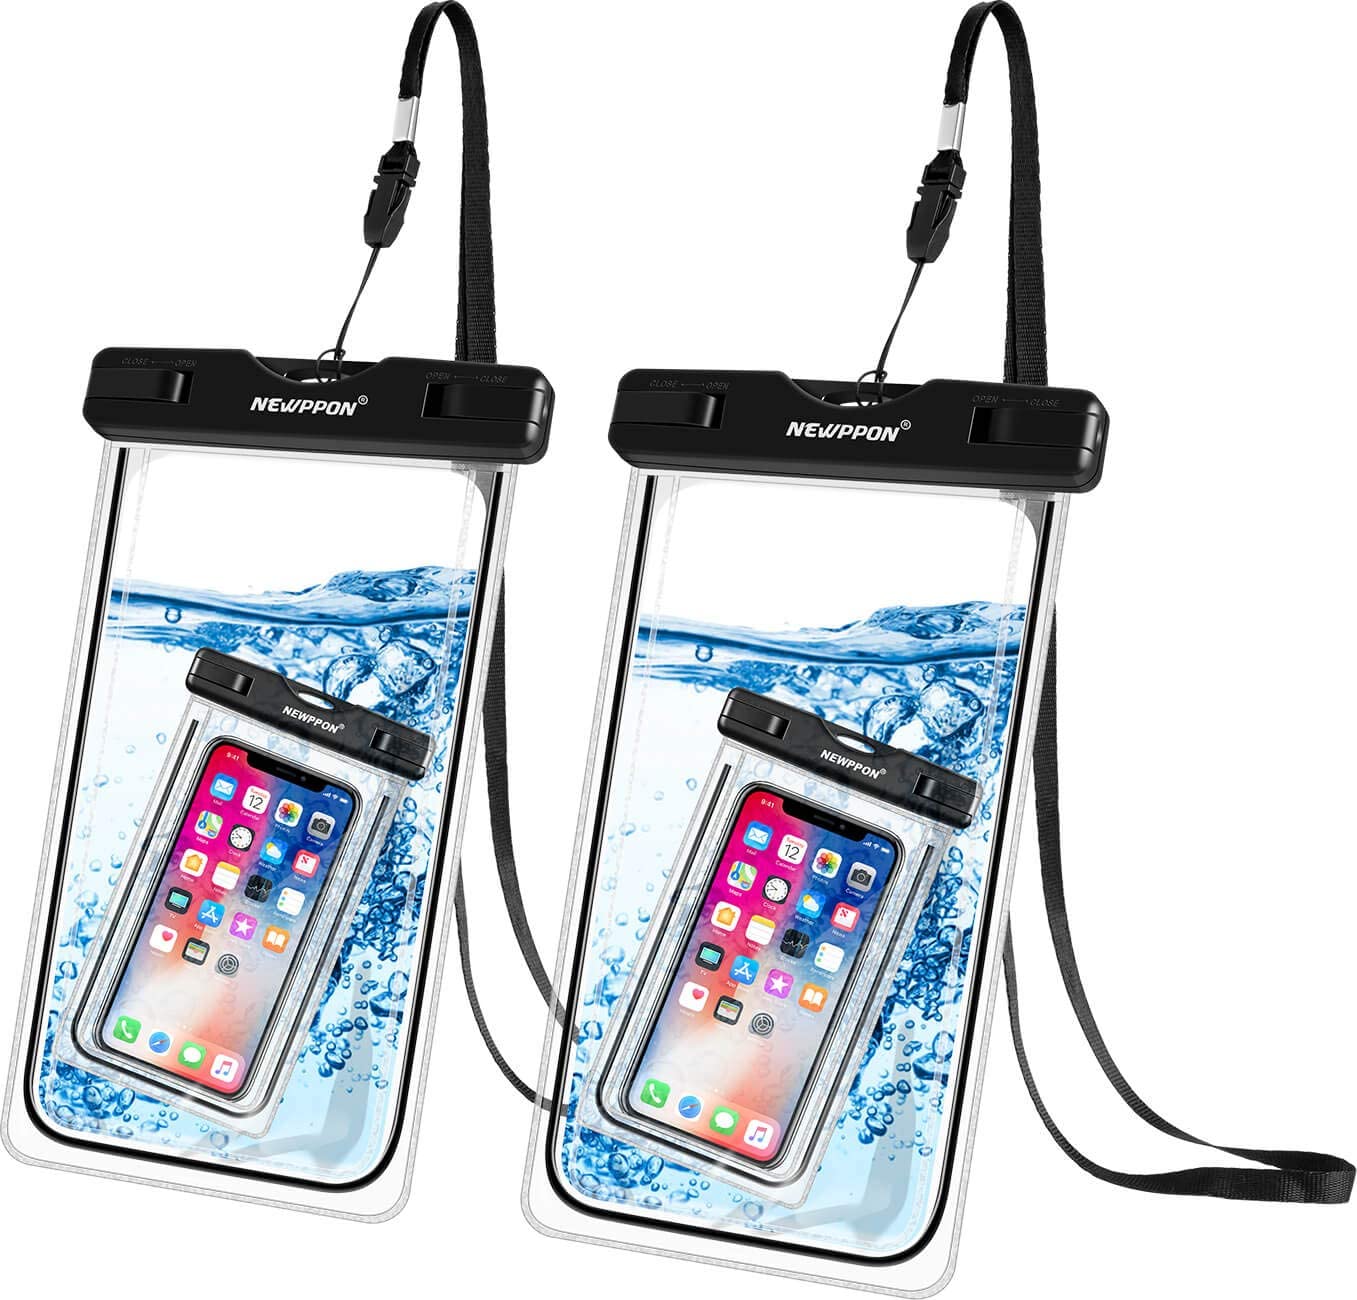 Newppon Water-Immersible Touch-Friendly Pool Phone Holders, 2-Pack